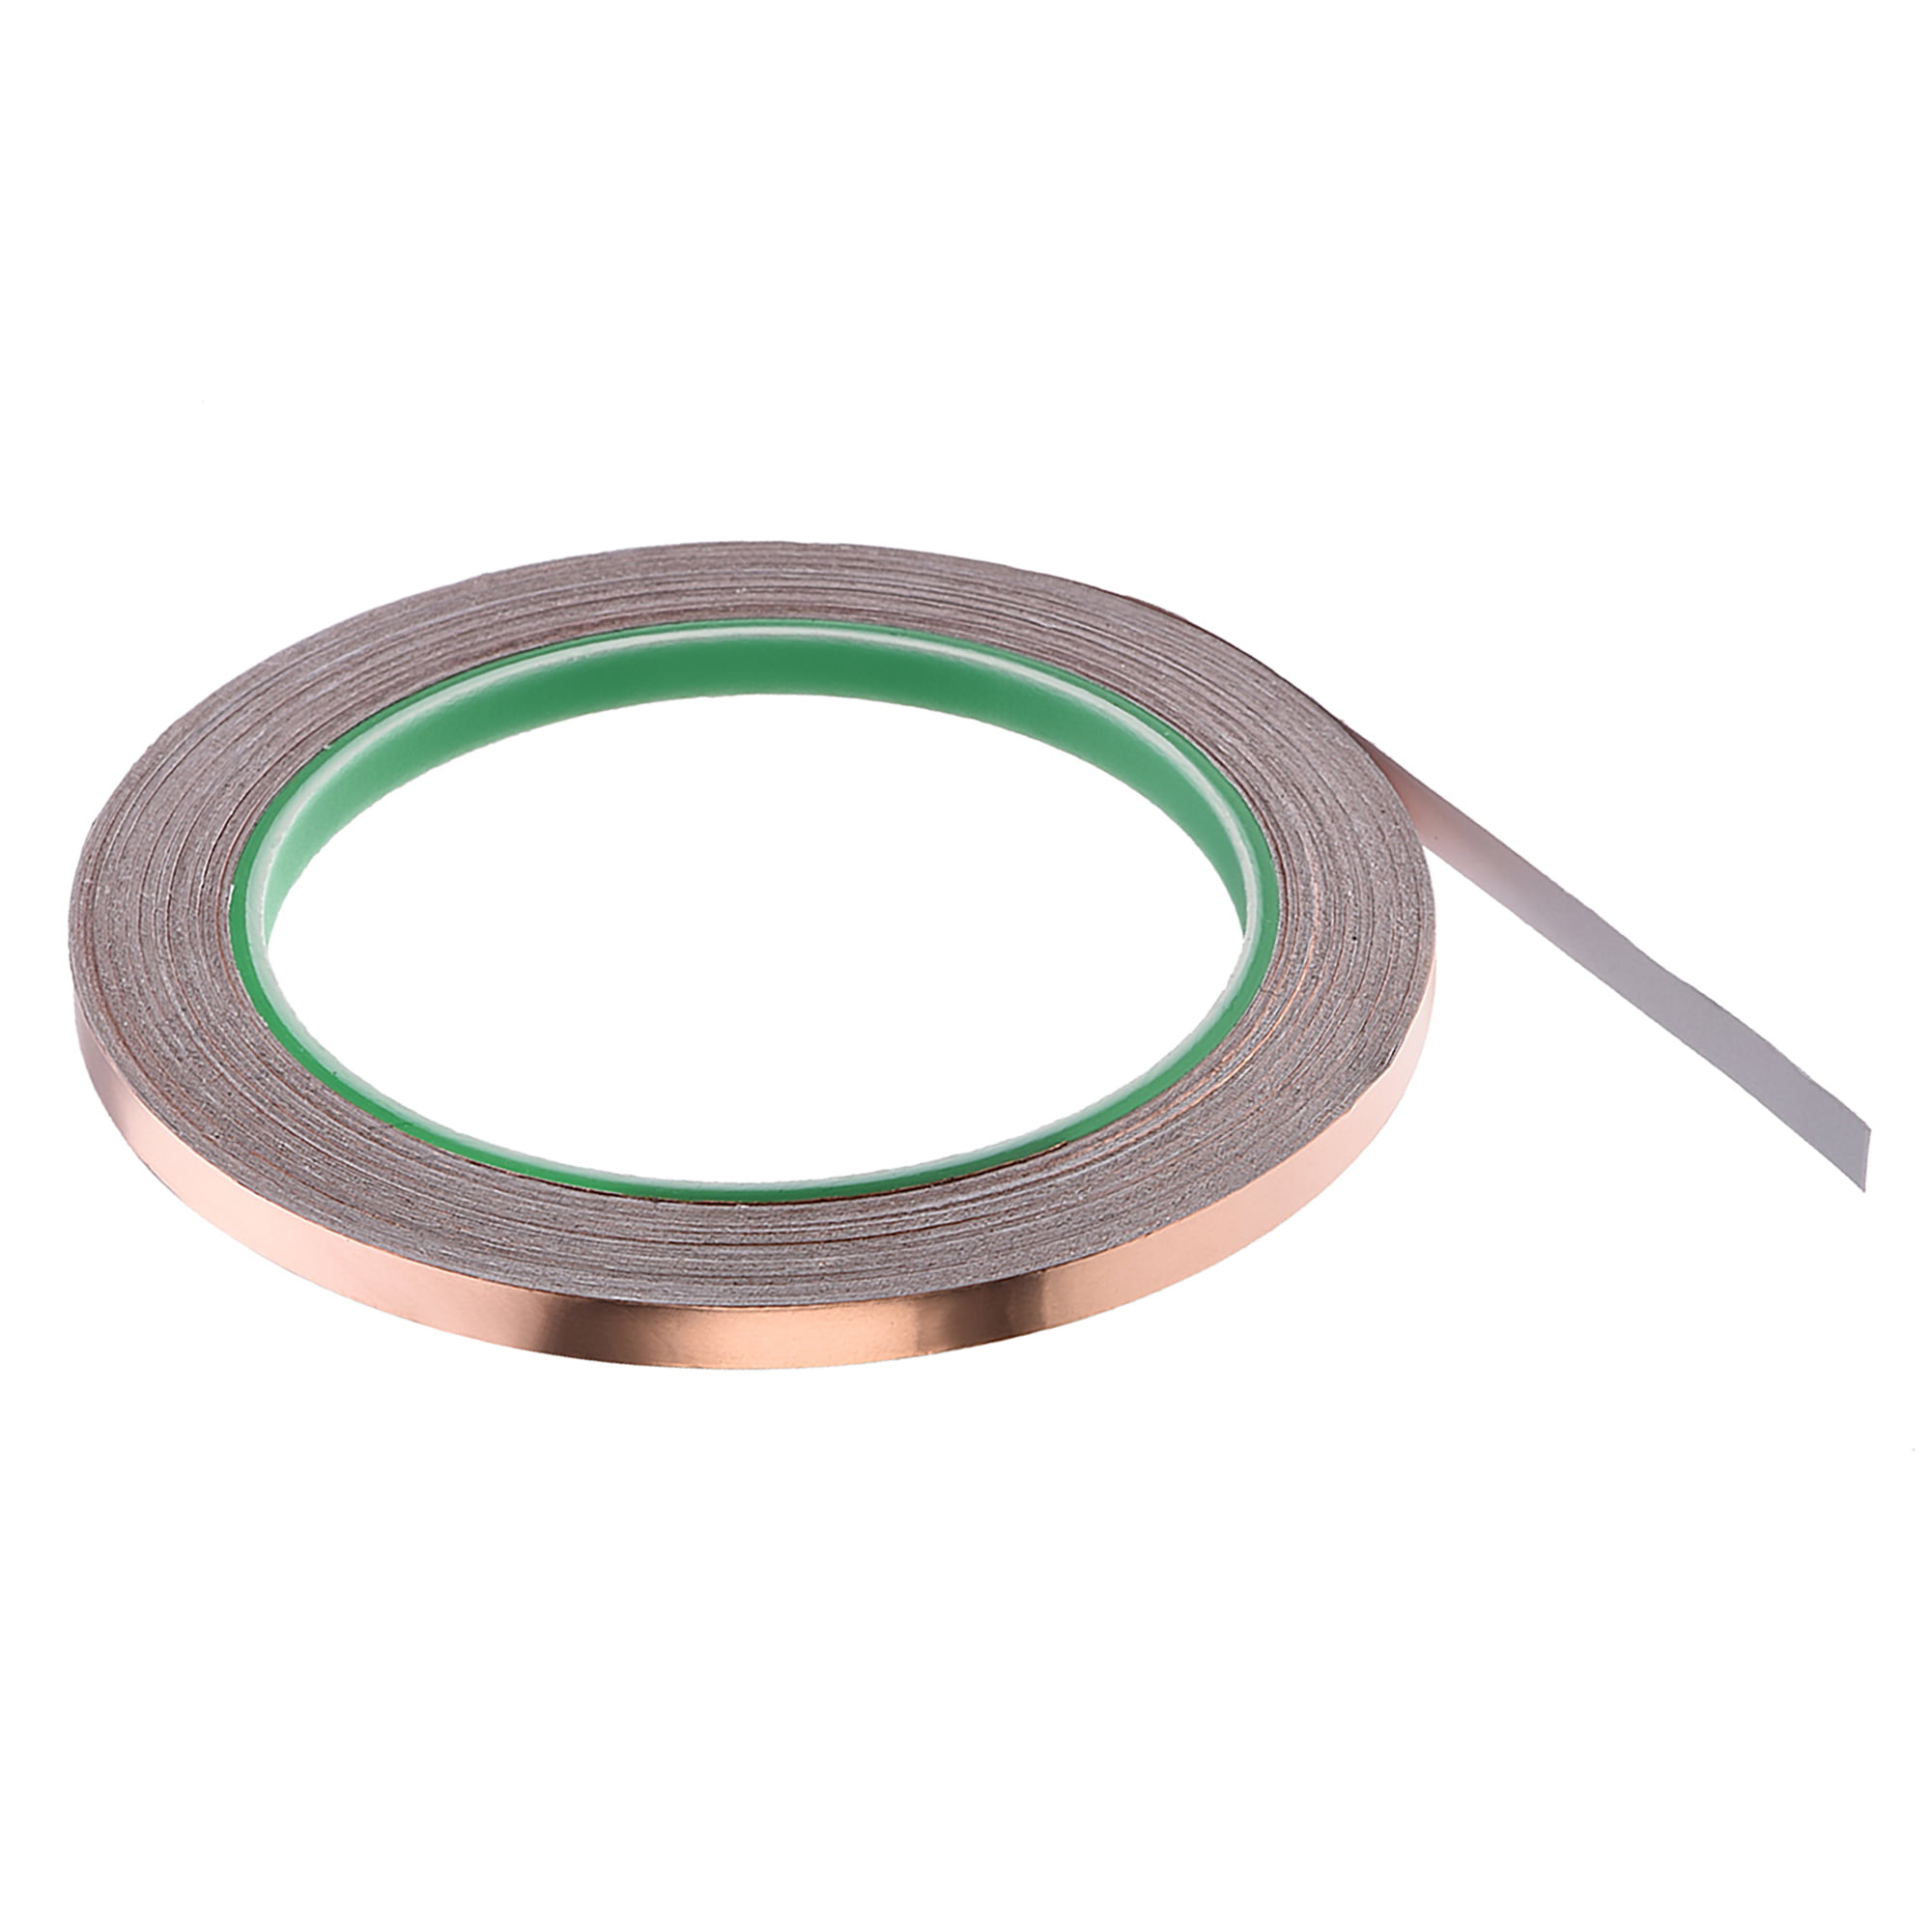 Hxtape Copper Foil Tape, Conductive Adhesive, Double-Sided